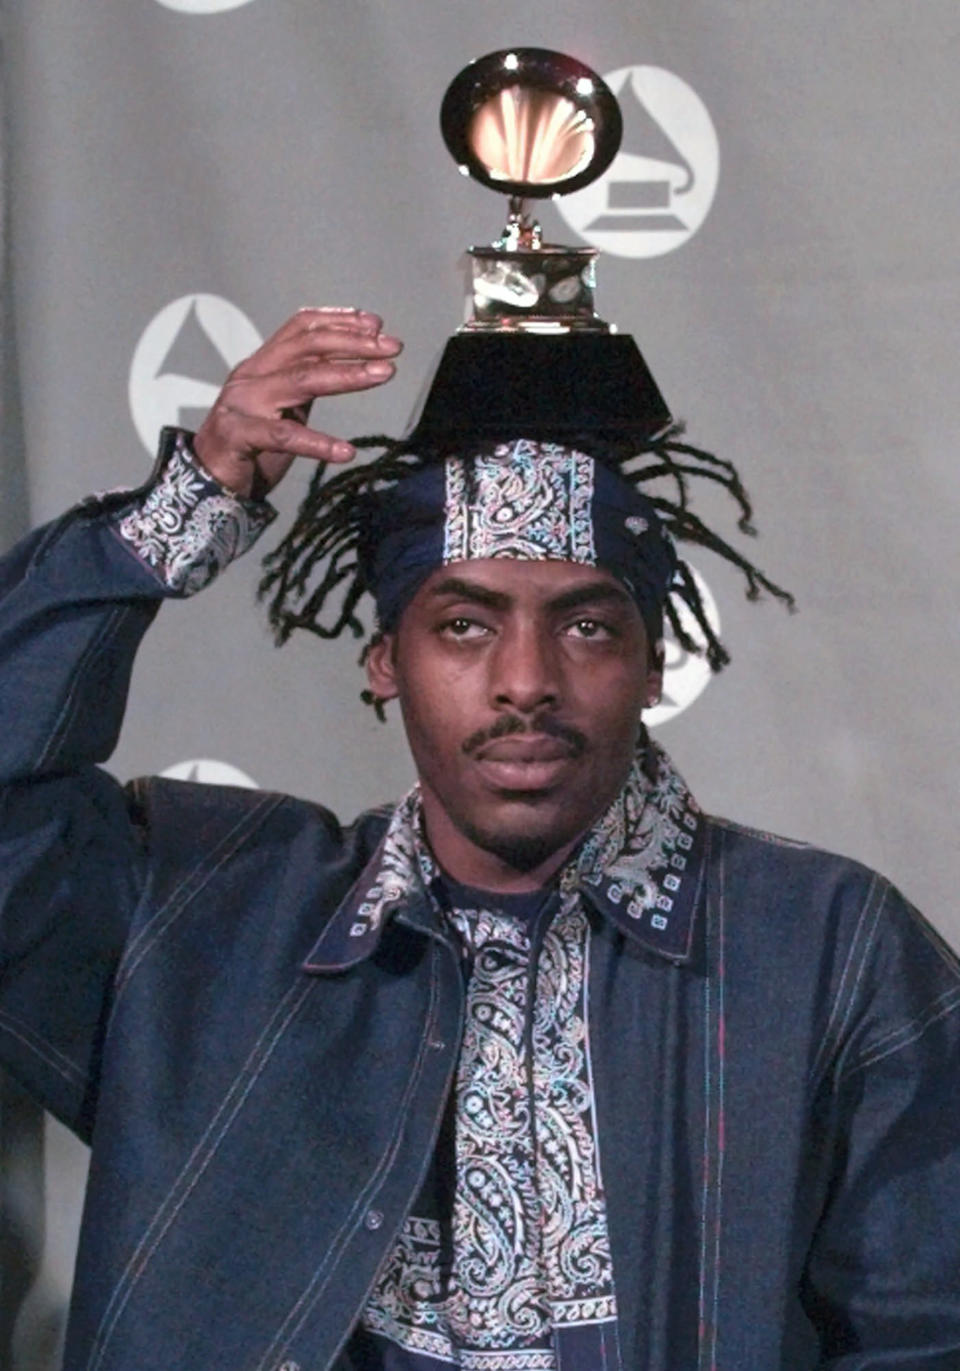 FILE - Coolio balances the Grammy he won for Best Rap Solo Performance at the 38th annual Grammy Awards at the Shrine Auditorium in Los Angeles, Wednesday, Feb.  28, 1996. Coolio, the rapper who was among hip-hop's biggest names of the 1990s with hits including “Gangsta’s Paradise”  and “Fantastic Voyage,”  has died.  Manager Jarez Posey tells The Associated Press that Coolio, whose legal name was Artis Leon Ivey Jr., died at the Los Angeles home of a friend on Wednesday, Sept.  28, 2022. He was 59. (AP Photo/Reed Saxon, File)